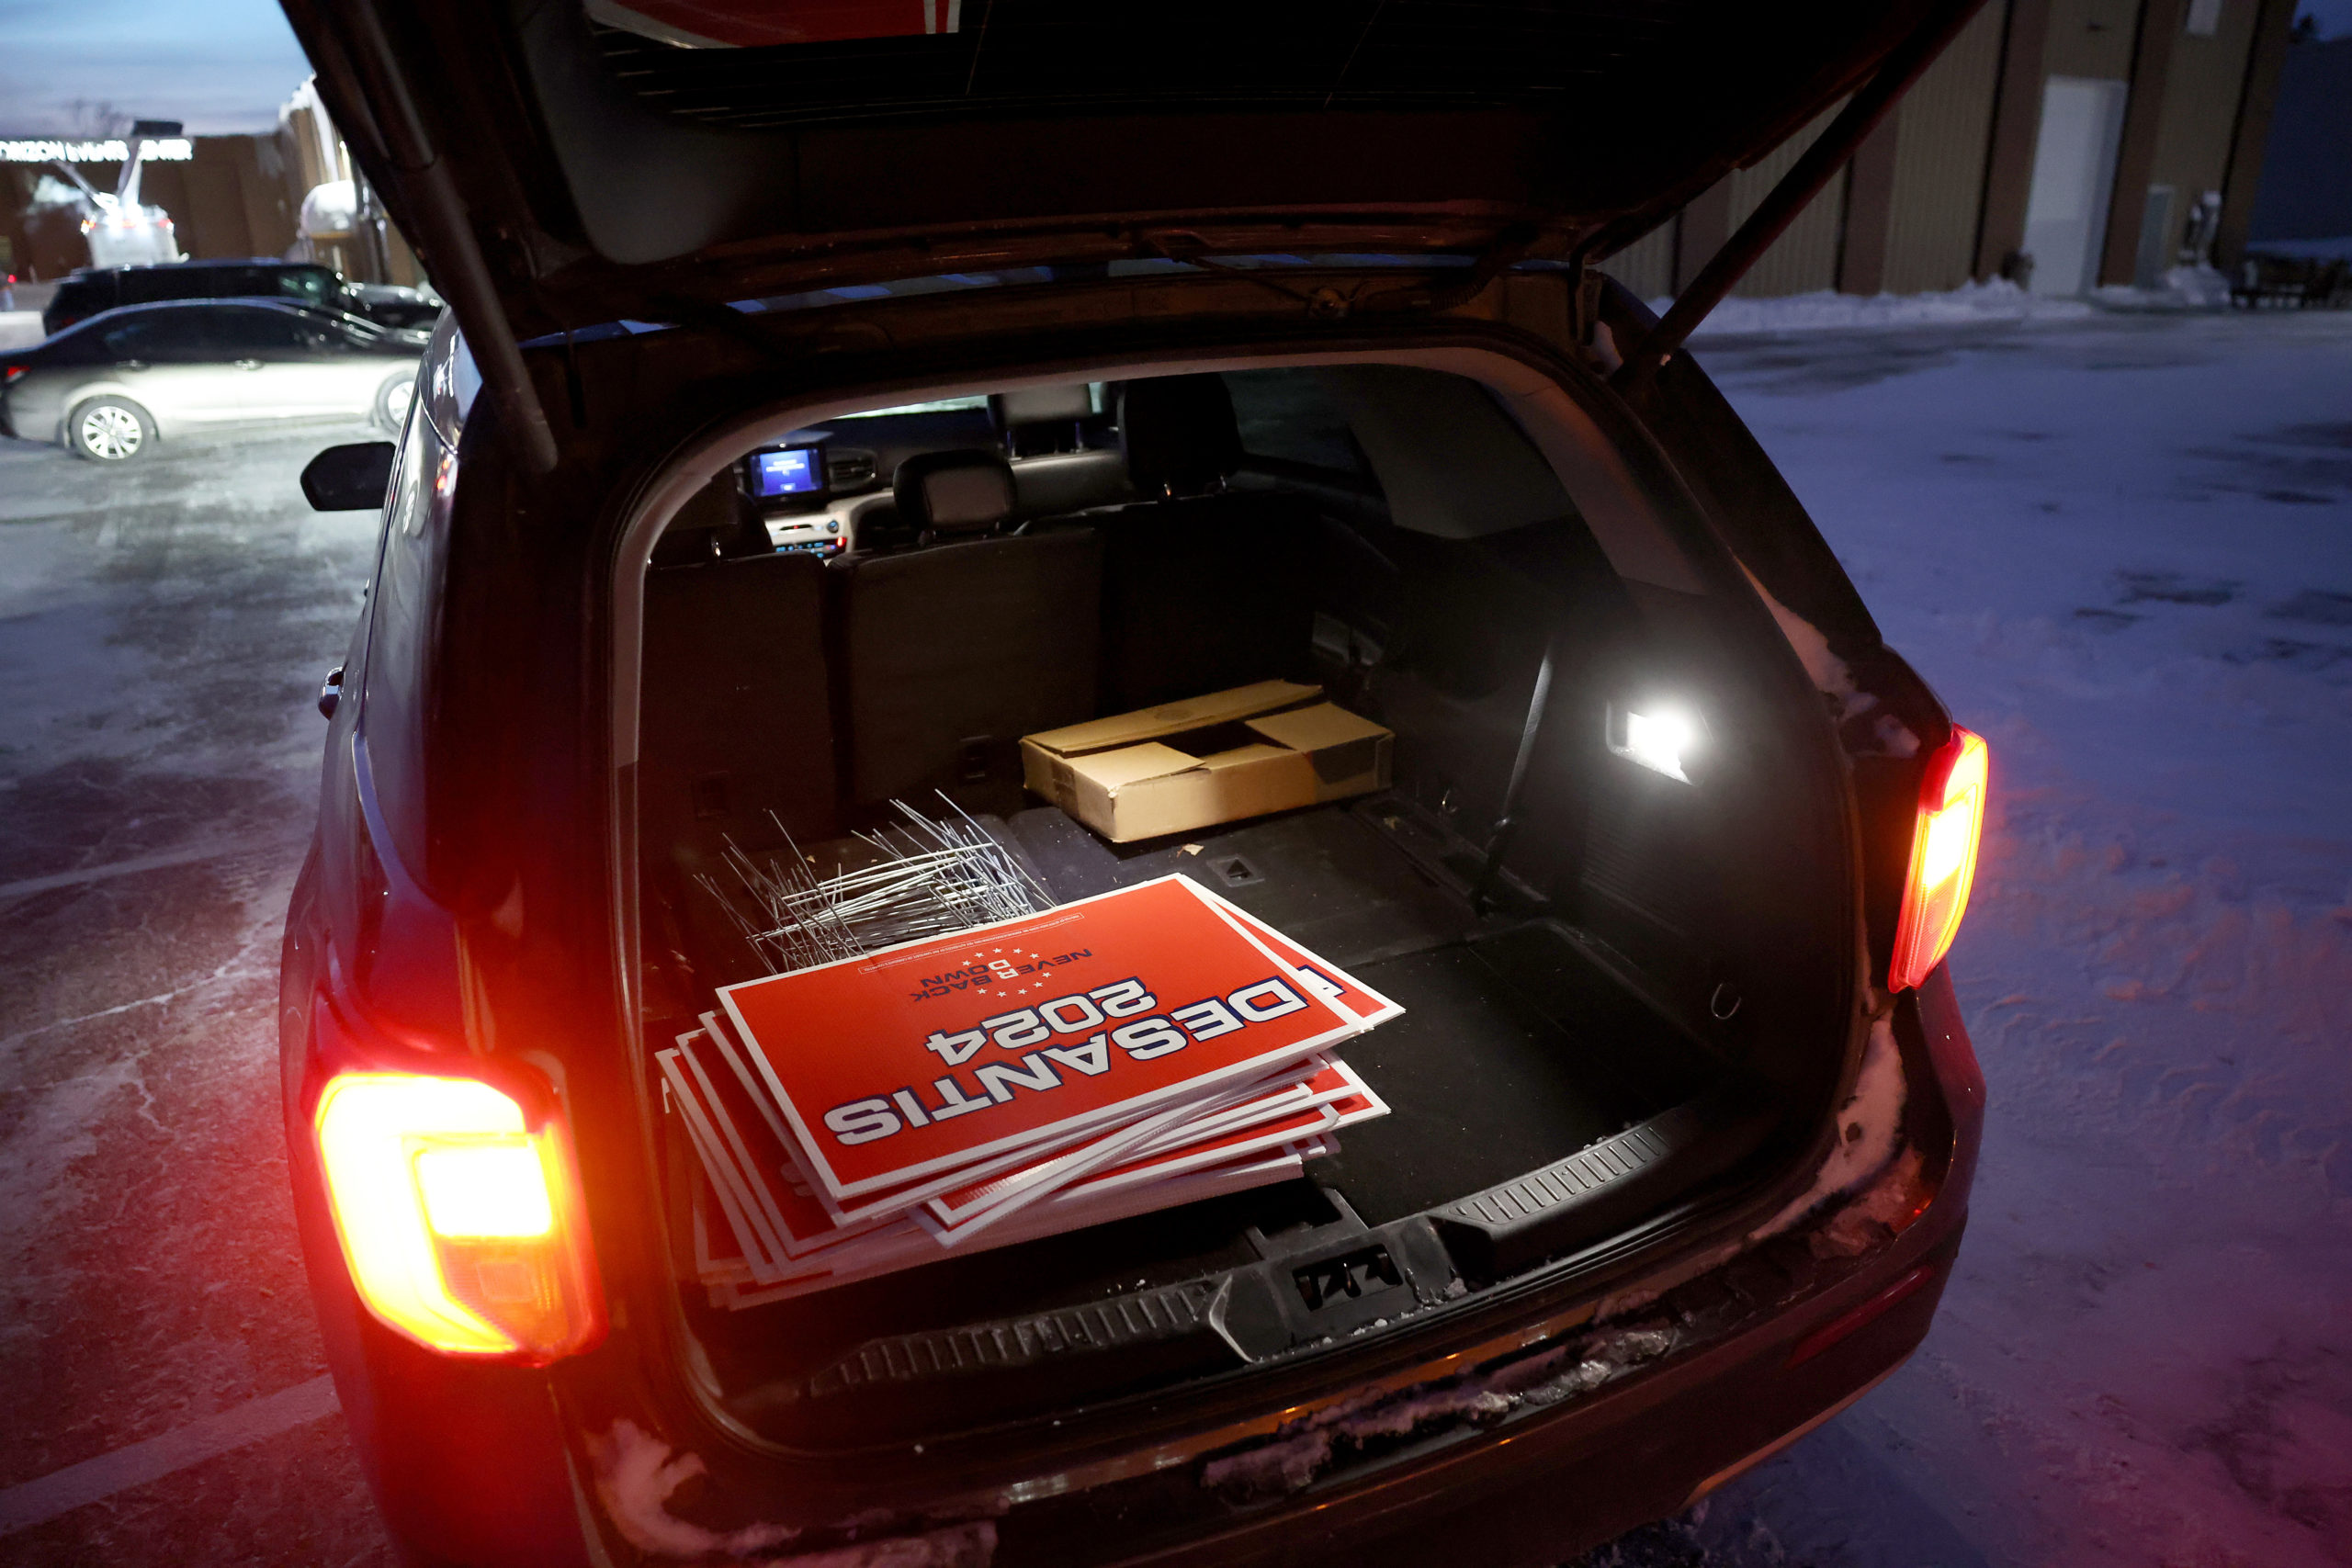 Ron DeSantis campaign signs sit in the back of a car outside a caucus site at the Horizon Events Center on January 15, 2024 in Clive, Iowa. Iowans vote today in the state’s caucuses for the first contest in the 2024 Republican presidential nominating process. (Photo by Kevin Dietsch/Getty Images)